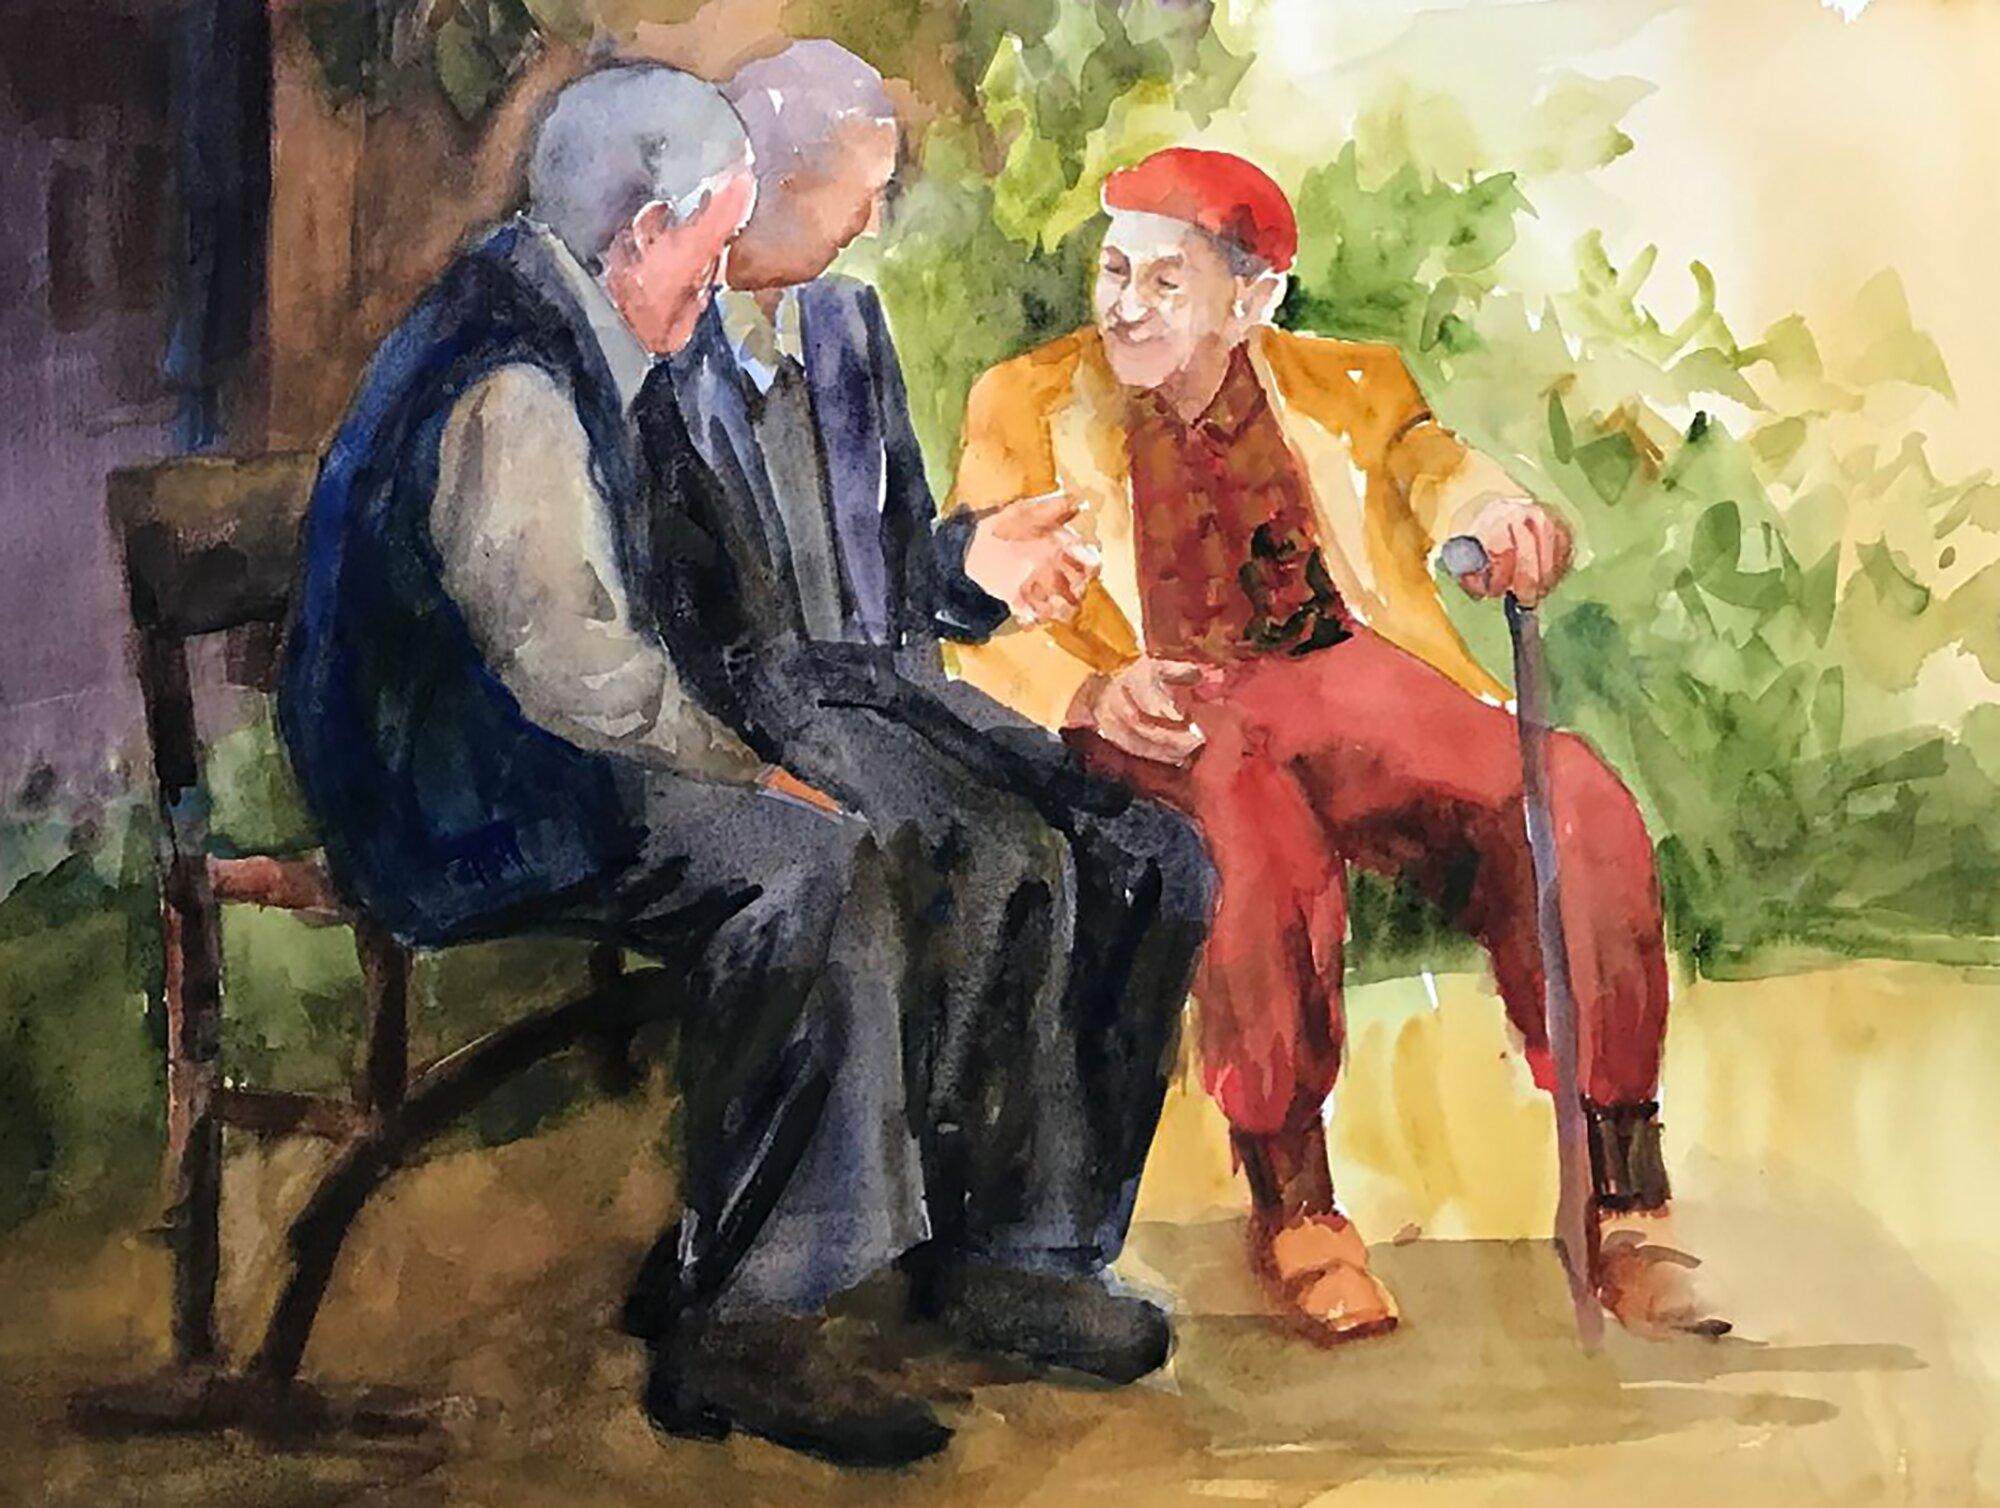 The Entertainer, Painting, Watercolor on Watercolor Paper - Art by Terrece Beesley